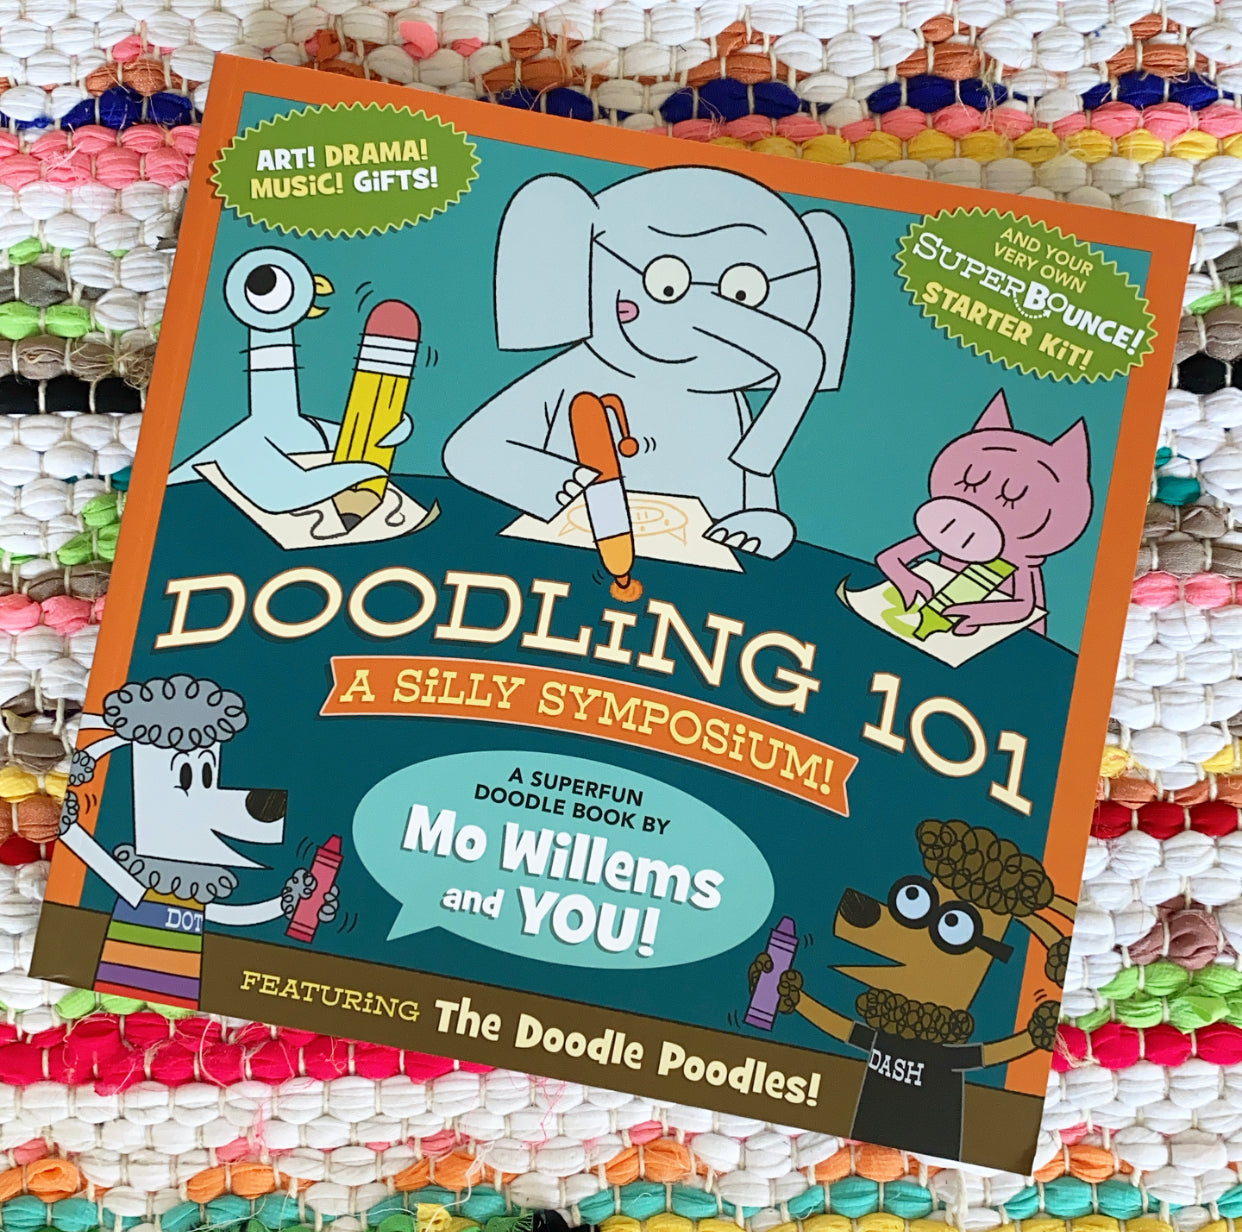 Bookshop　Brave　Doodling　–　Willems　101:　Mo　Symposium　A　Silly　Kind